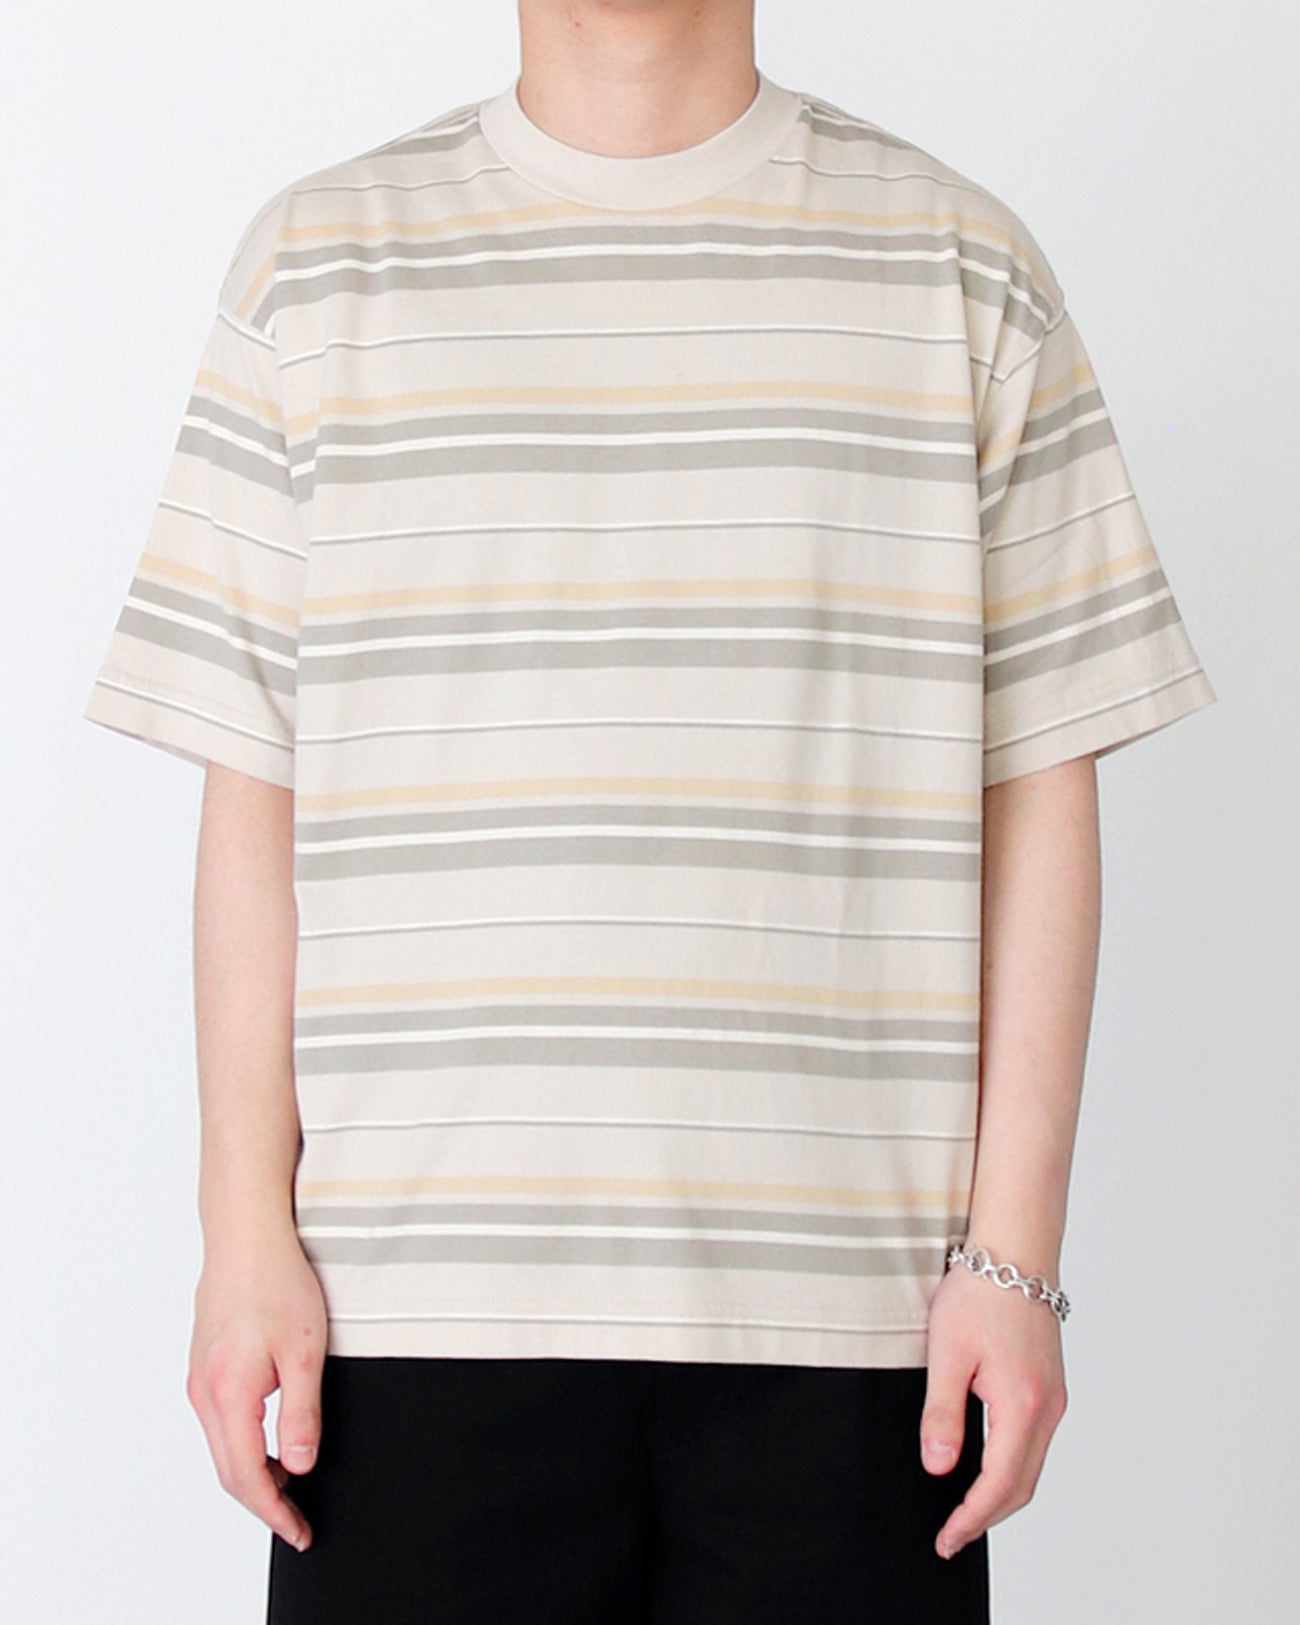 H/S CREW STRIPED - light gray - FAB4 ONLINE STORE